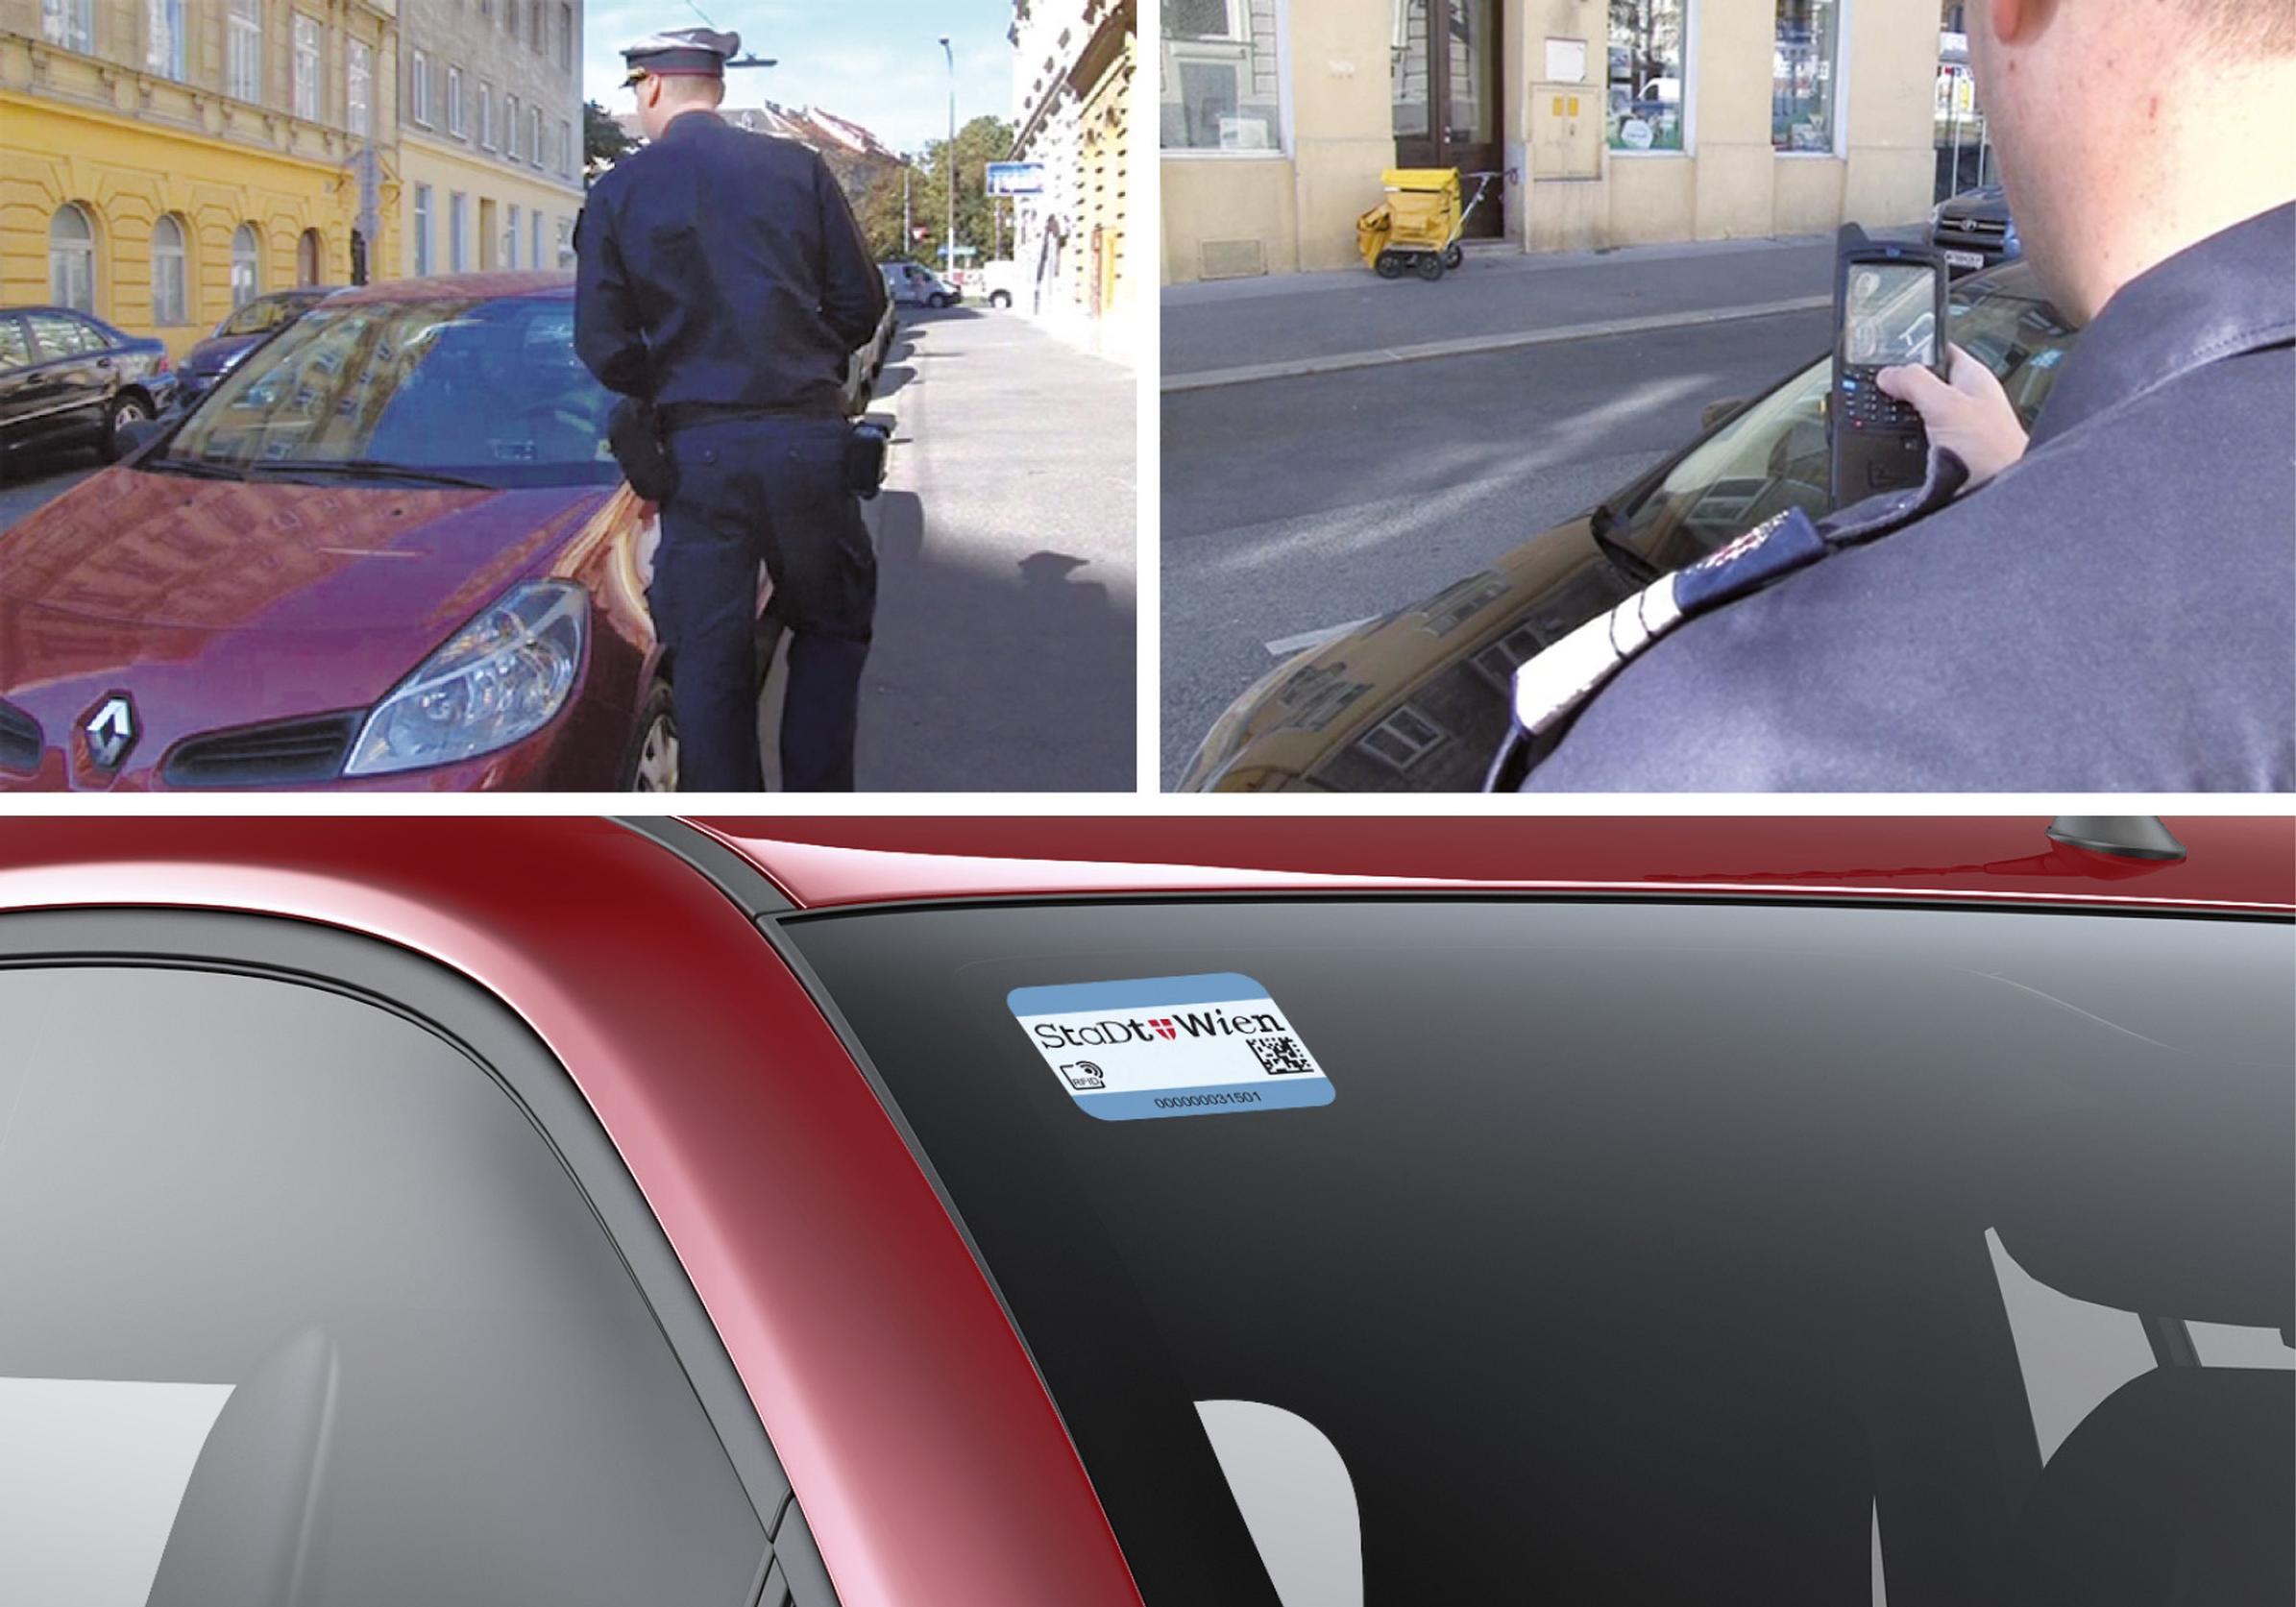 Vienna has introduced RFID-tag based parking permits